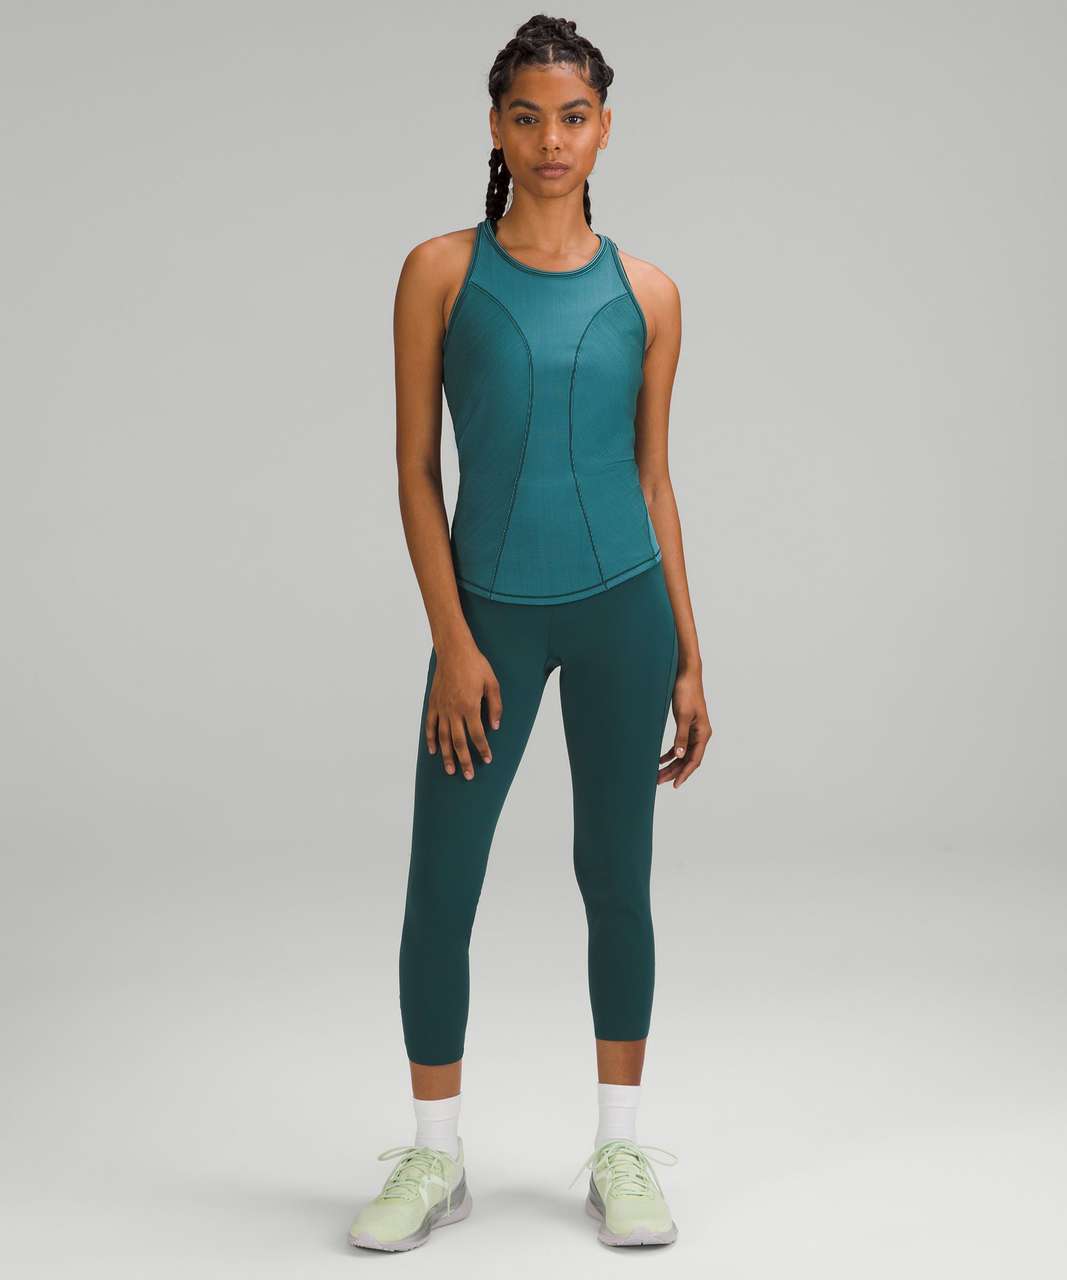 Lululemon Base Pace Two-Toned Ribbed Tank Top - Green Jasper